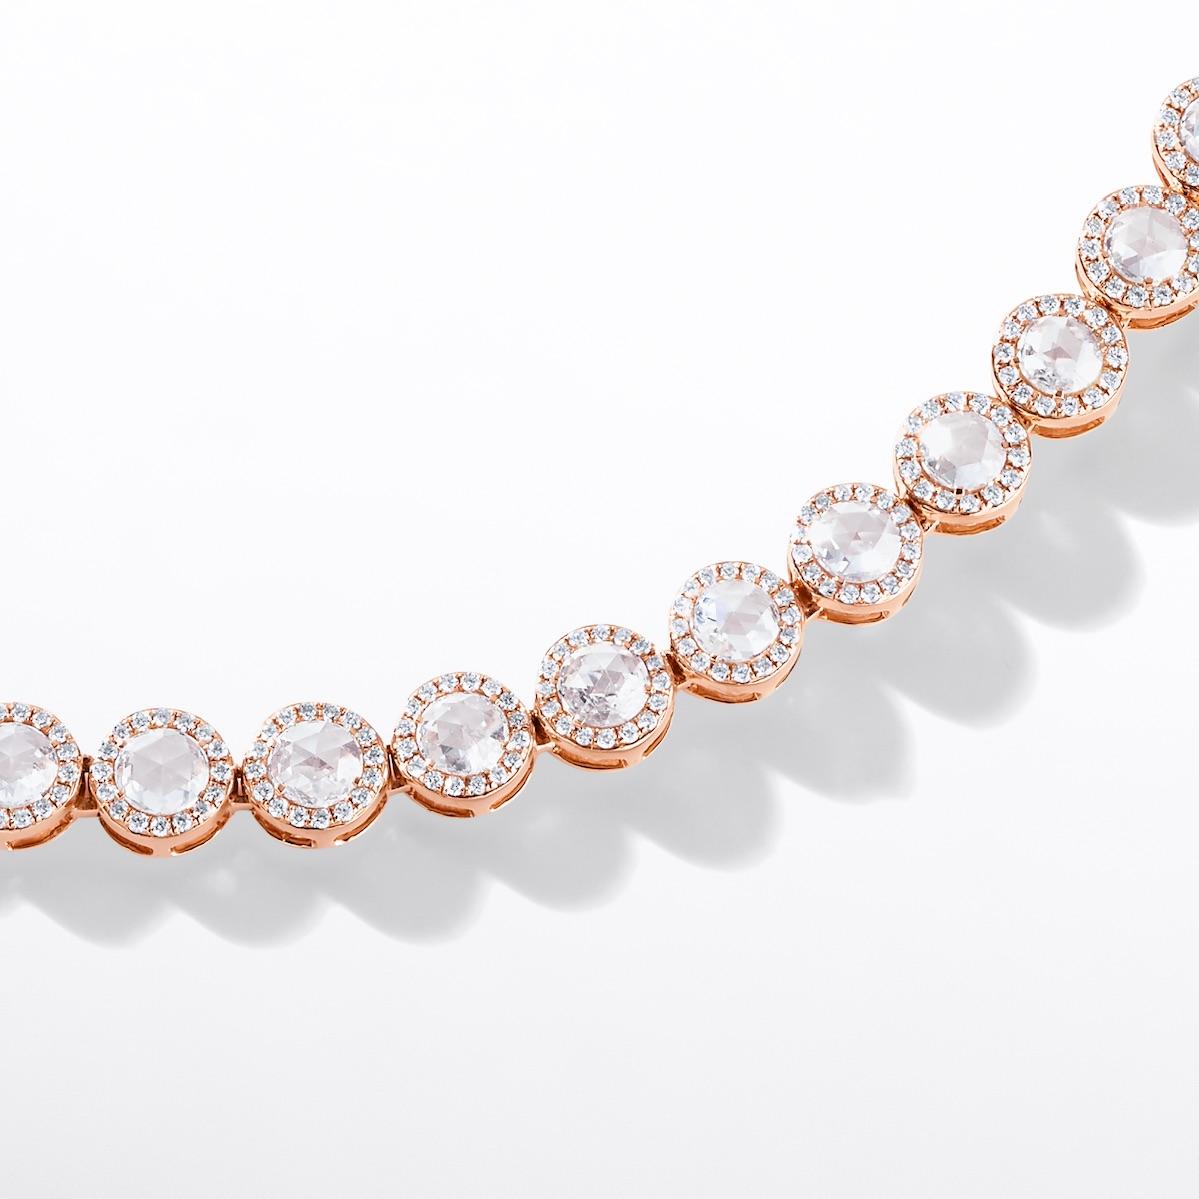 64 Facets 9 Carat Rose Cut Diamond Necklace with Pave Accents and 18K Gold For Sale 2